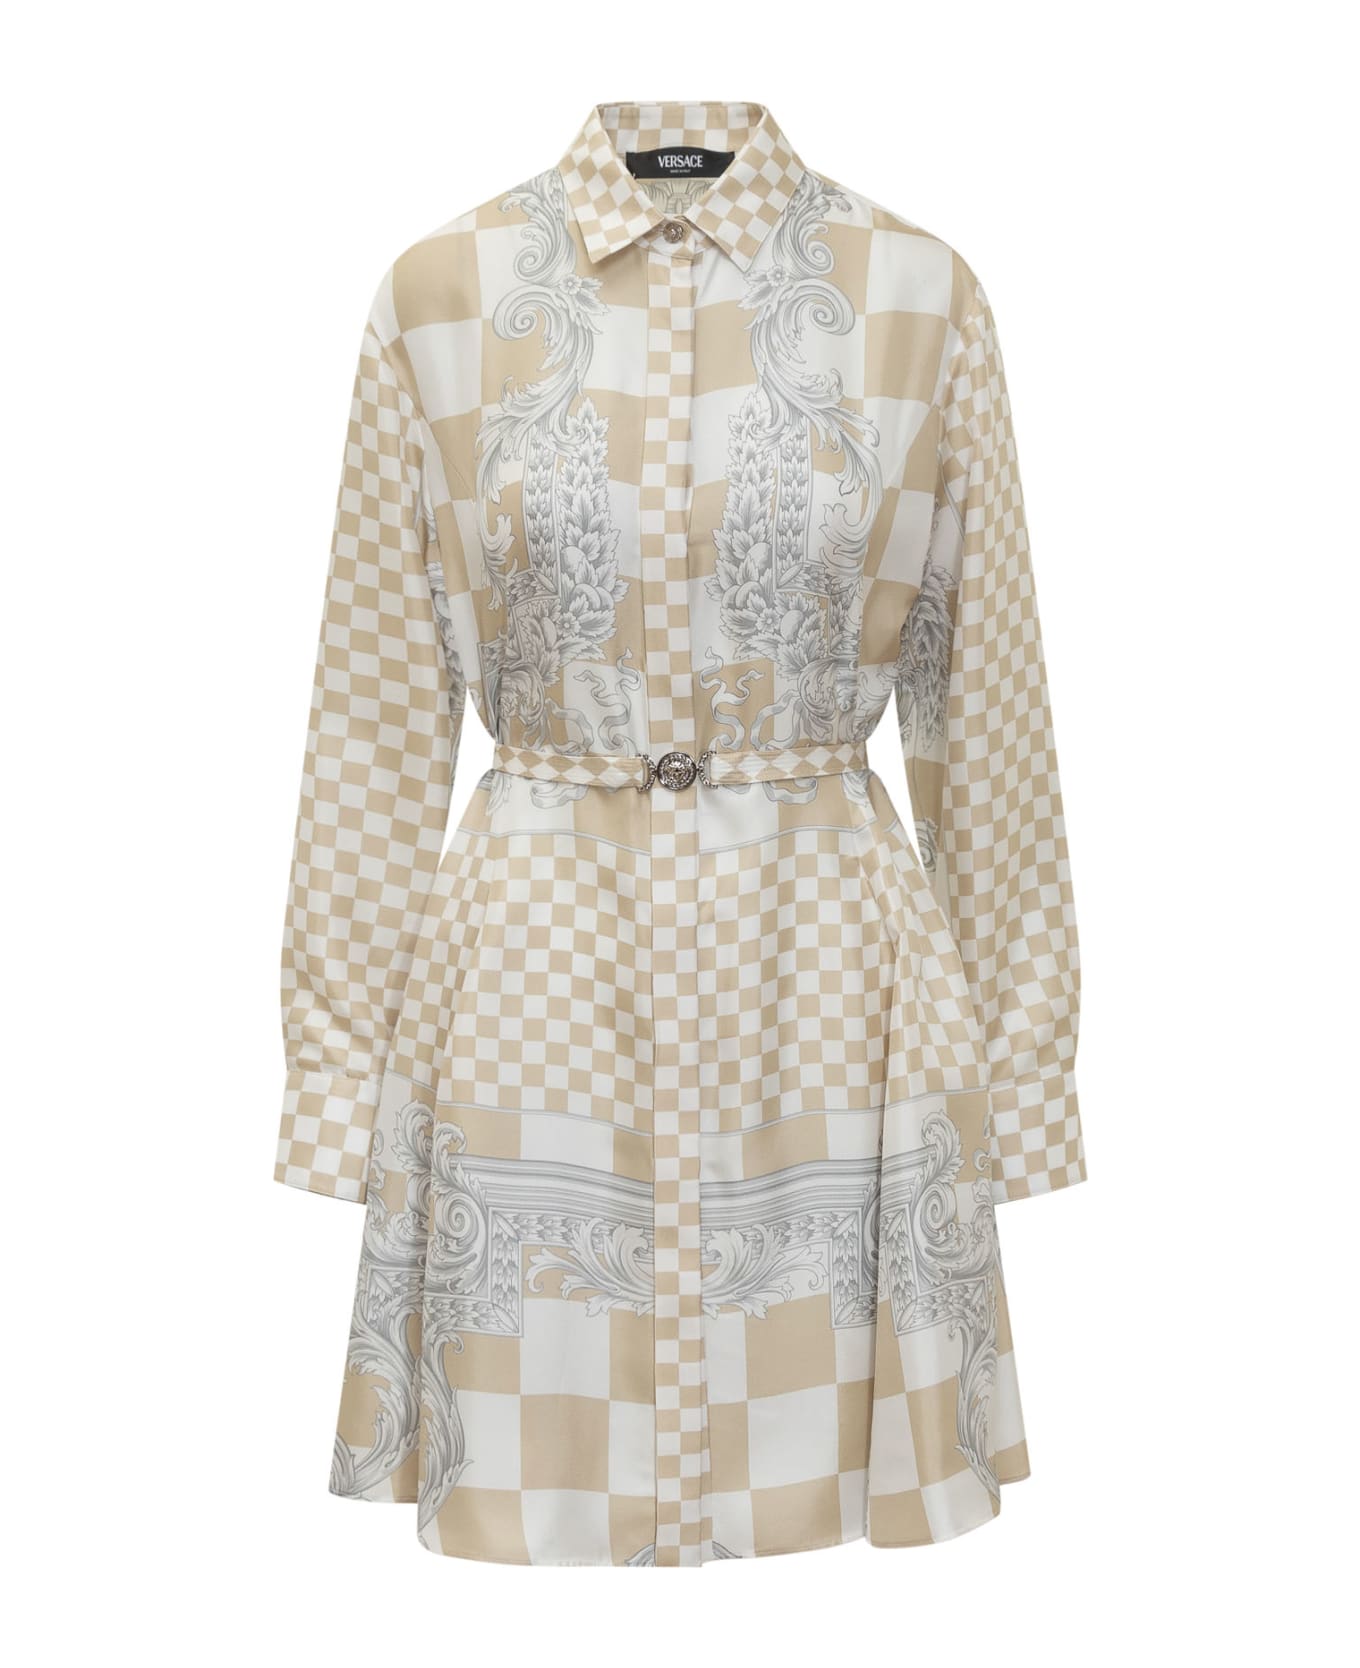 Versace Chemisier Dress With Baroque Print - LIGHT SAND-BIANCO-SILVER